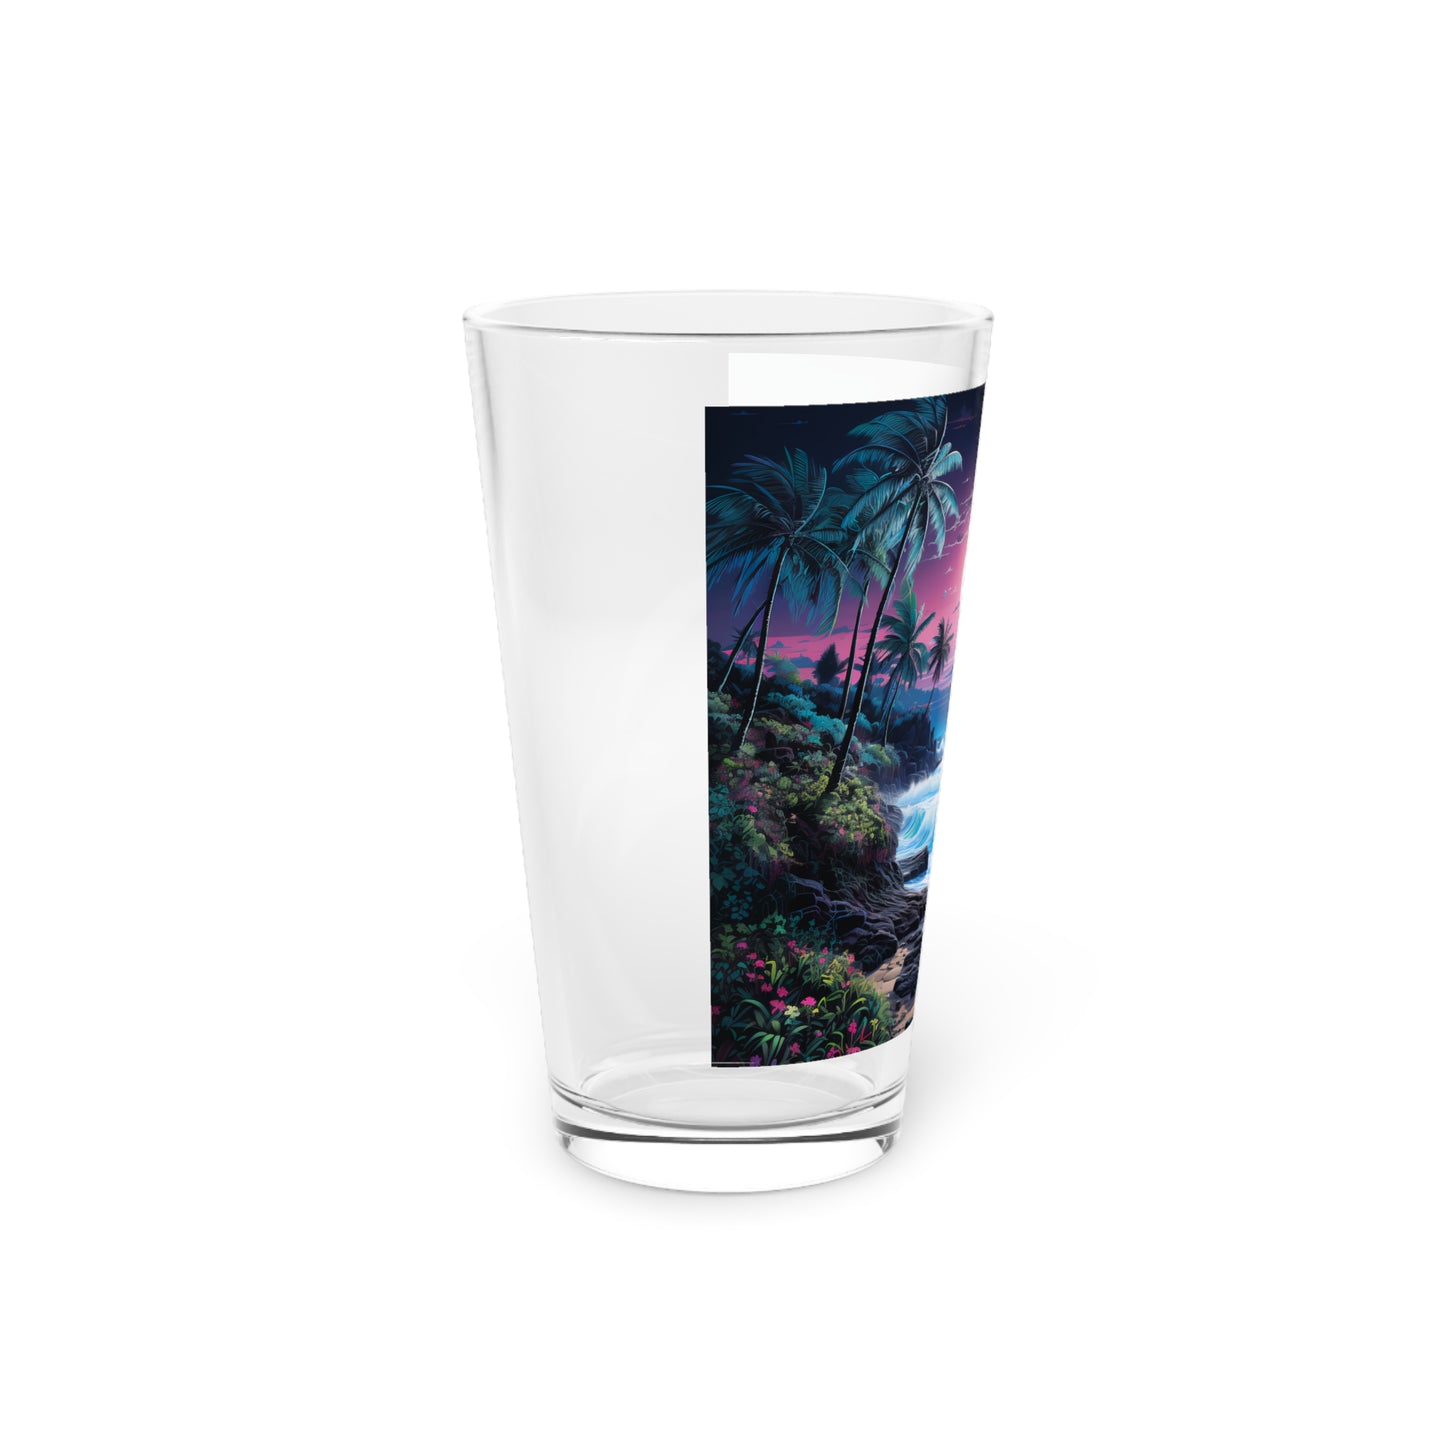 Transport yourself to a Tropical Paradise Beach Night Sky with our Pint Glass - Waves Design #018. Crafted by Stashbox.ai, this 16oz glass mirrors the serene beauty of a beach night. Sip your drinks in bliss, letting the waves and stars paint a picture of tranquility.